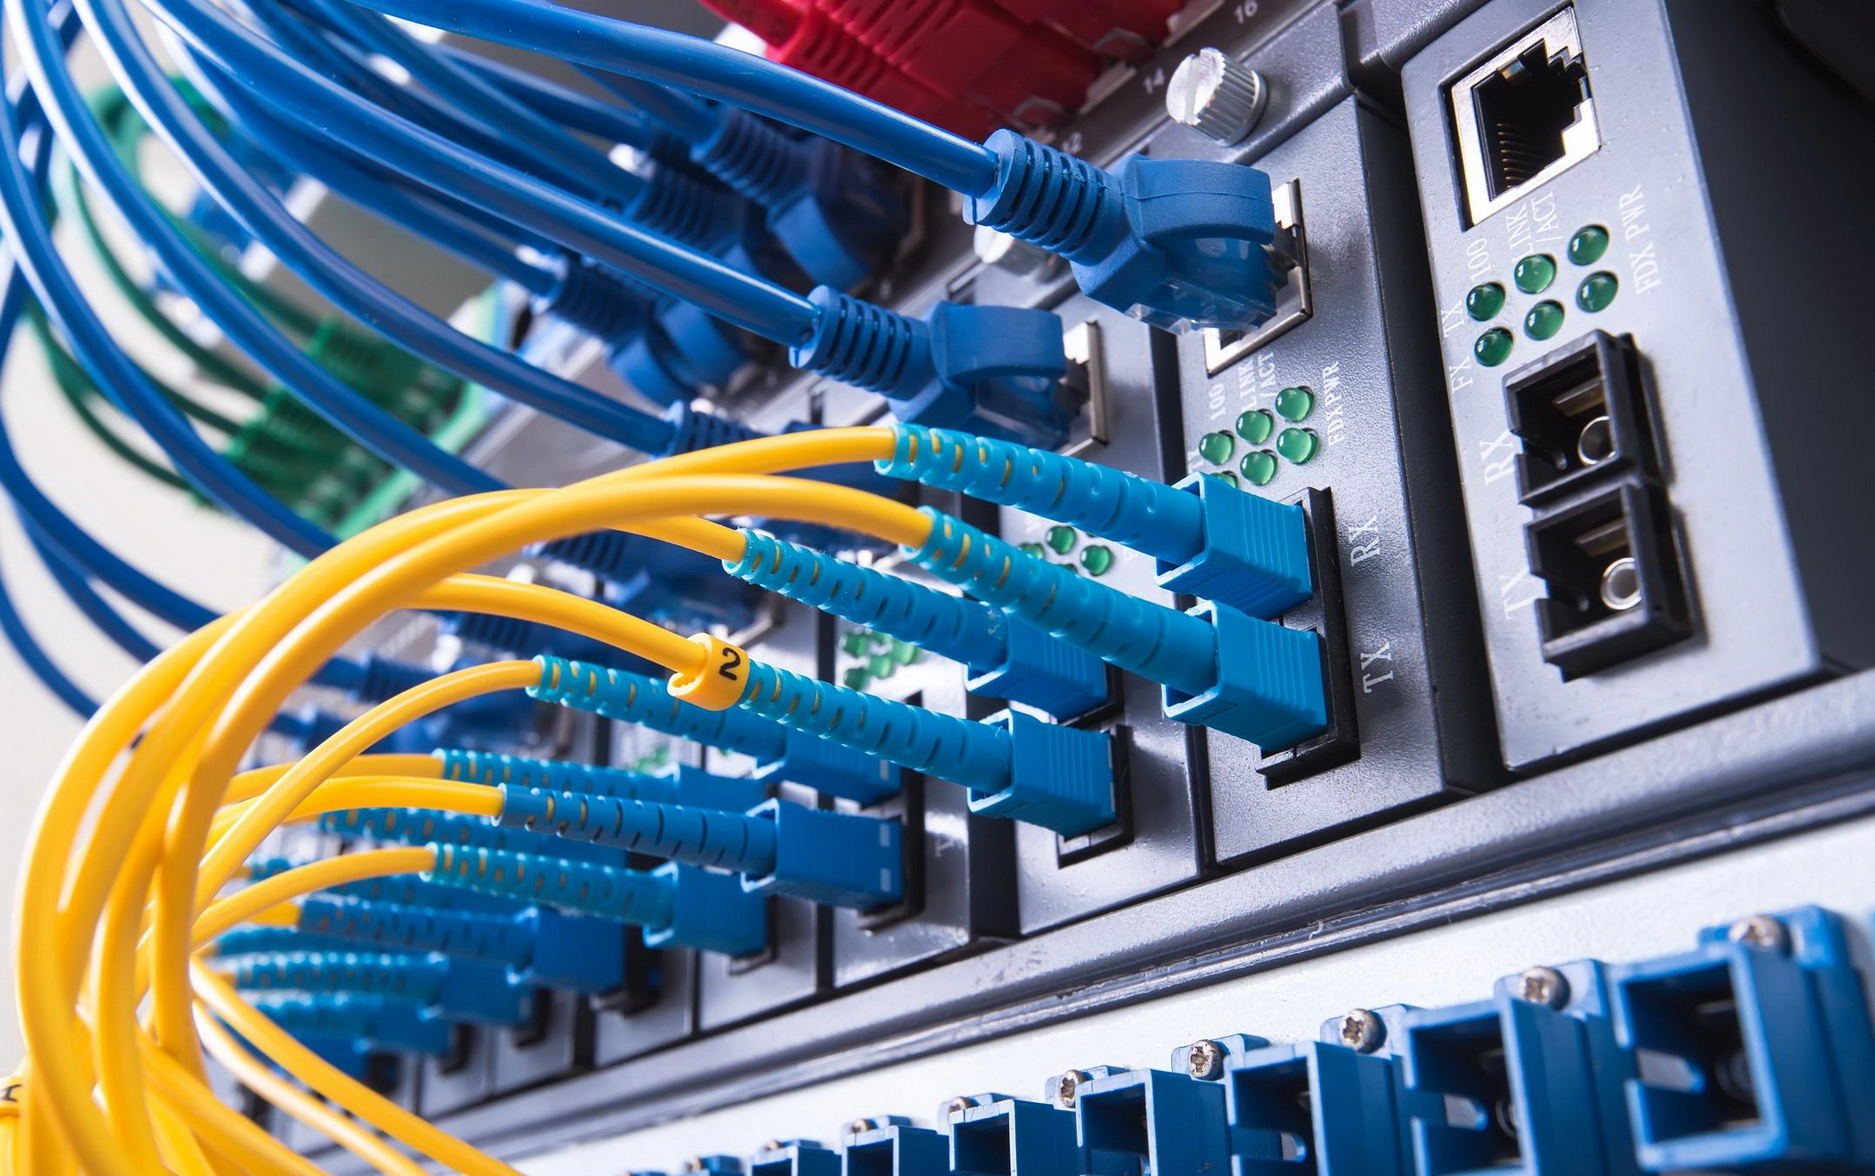 Structured Internet Computer Data Voice Telephone VoIP Network Cabling Wiring Installers for Office Commercial CAT5e & CAT6 - Fort Lauderdale, FL